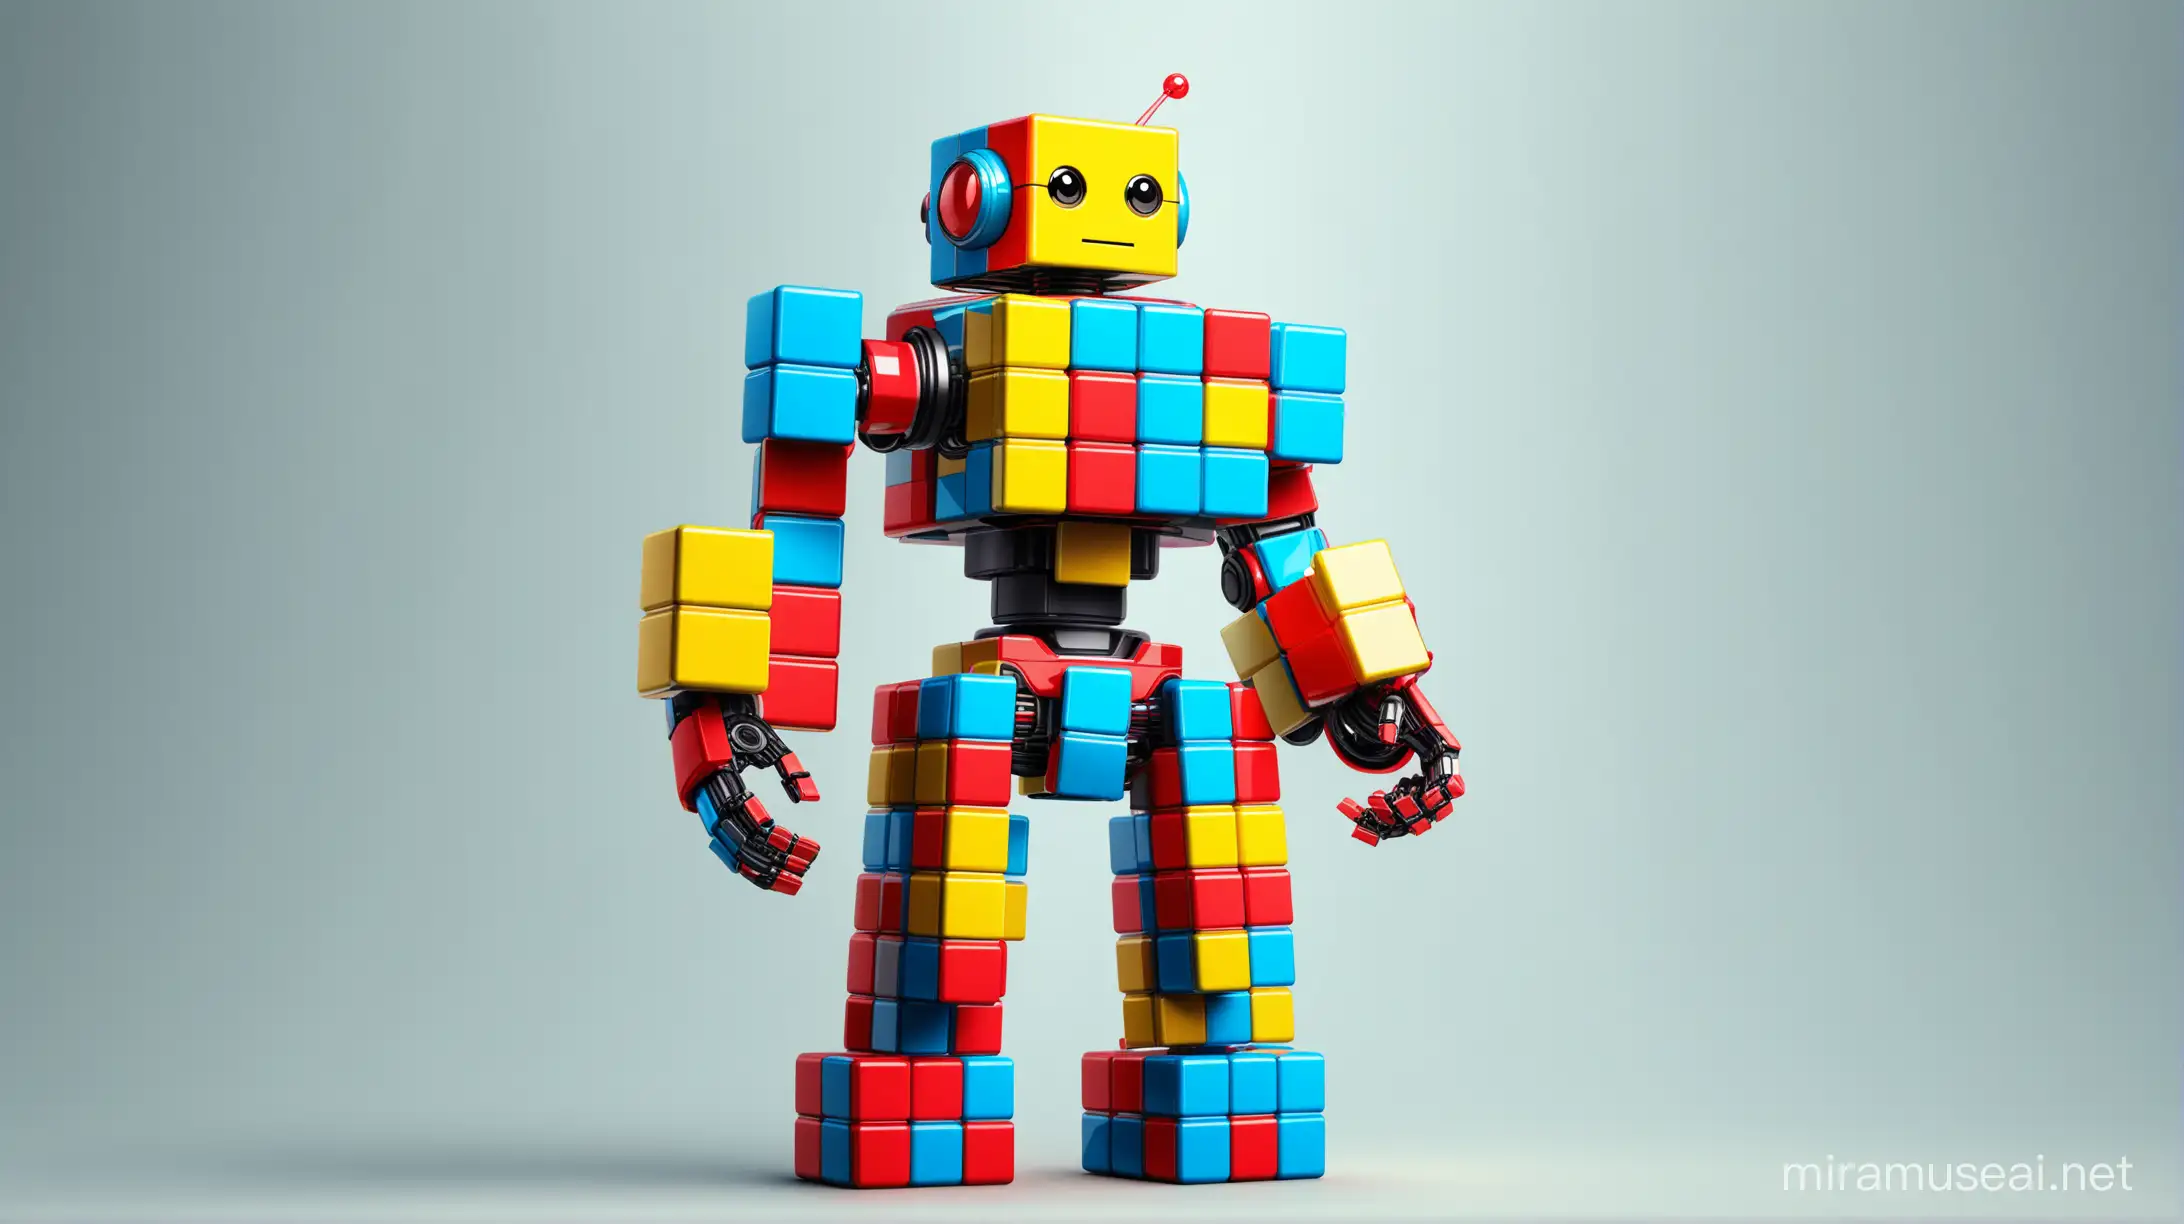 3D robot with rubiks cube pattern